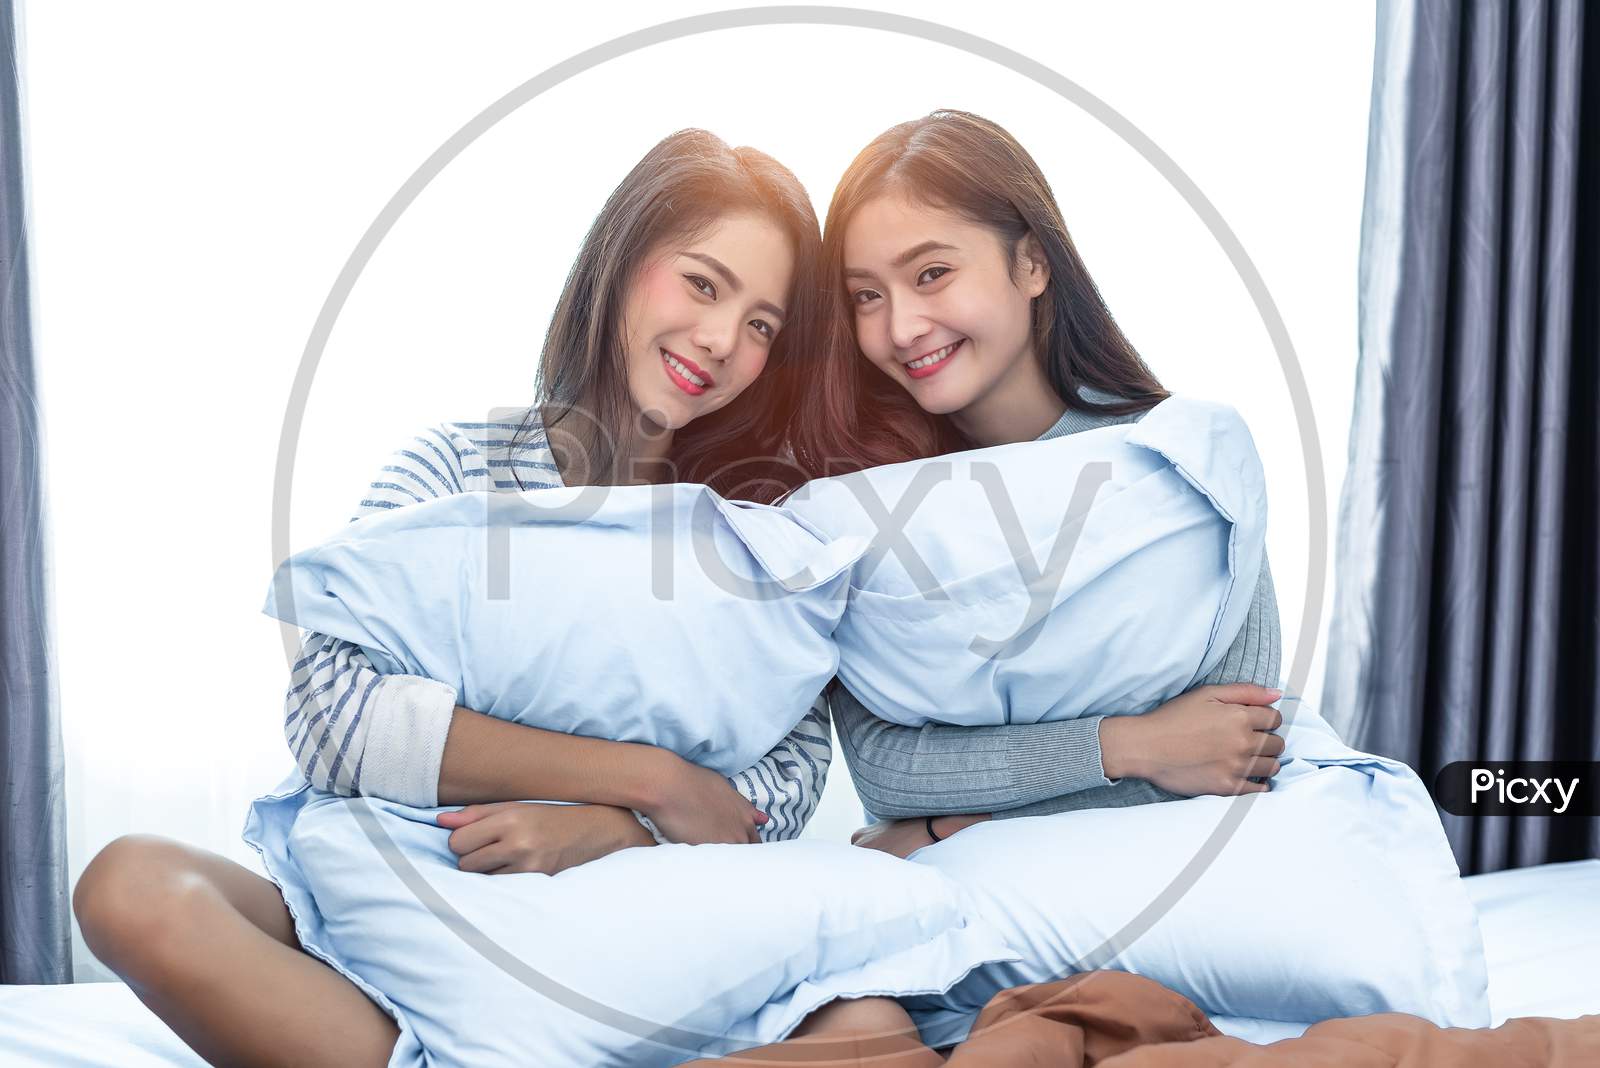 Two Asian Lesbian In Bedroom. Beauty Concept. Happy Lifestyles And Home Sweet Home Theme. Cushion Pillow Element And Window Background.